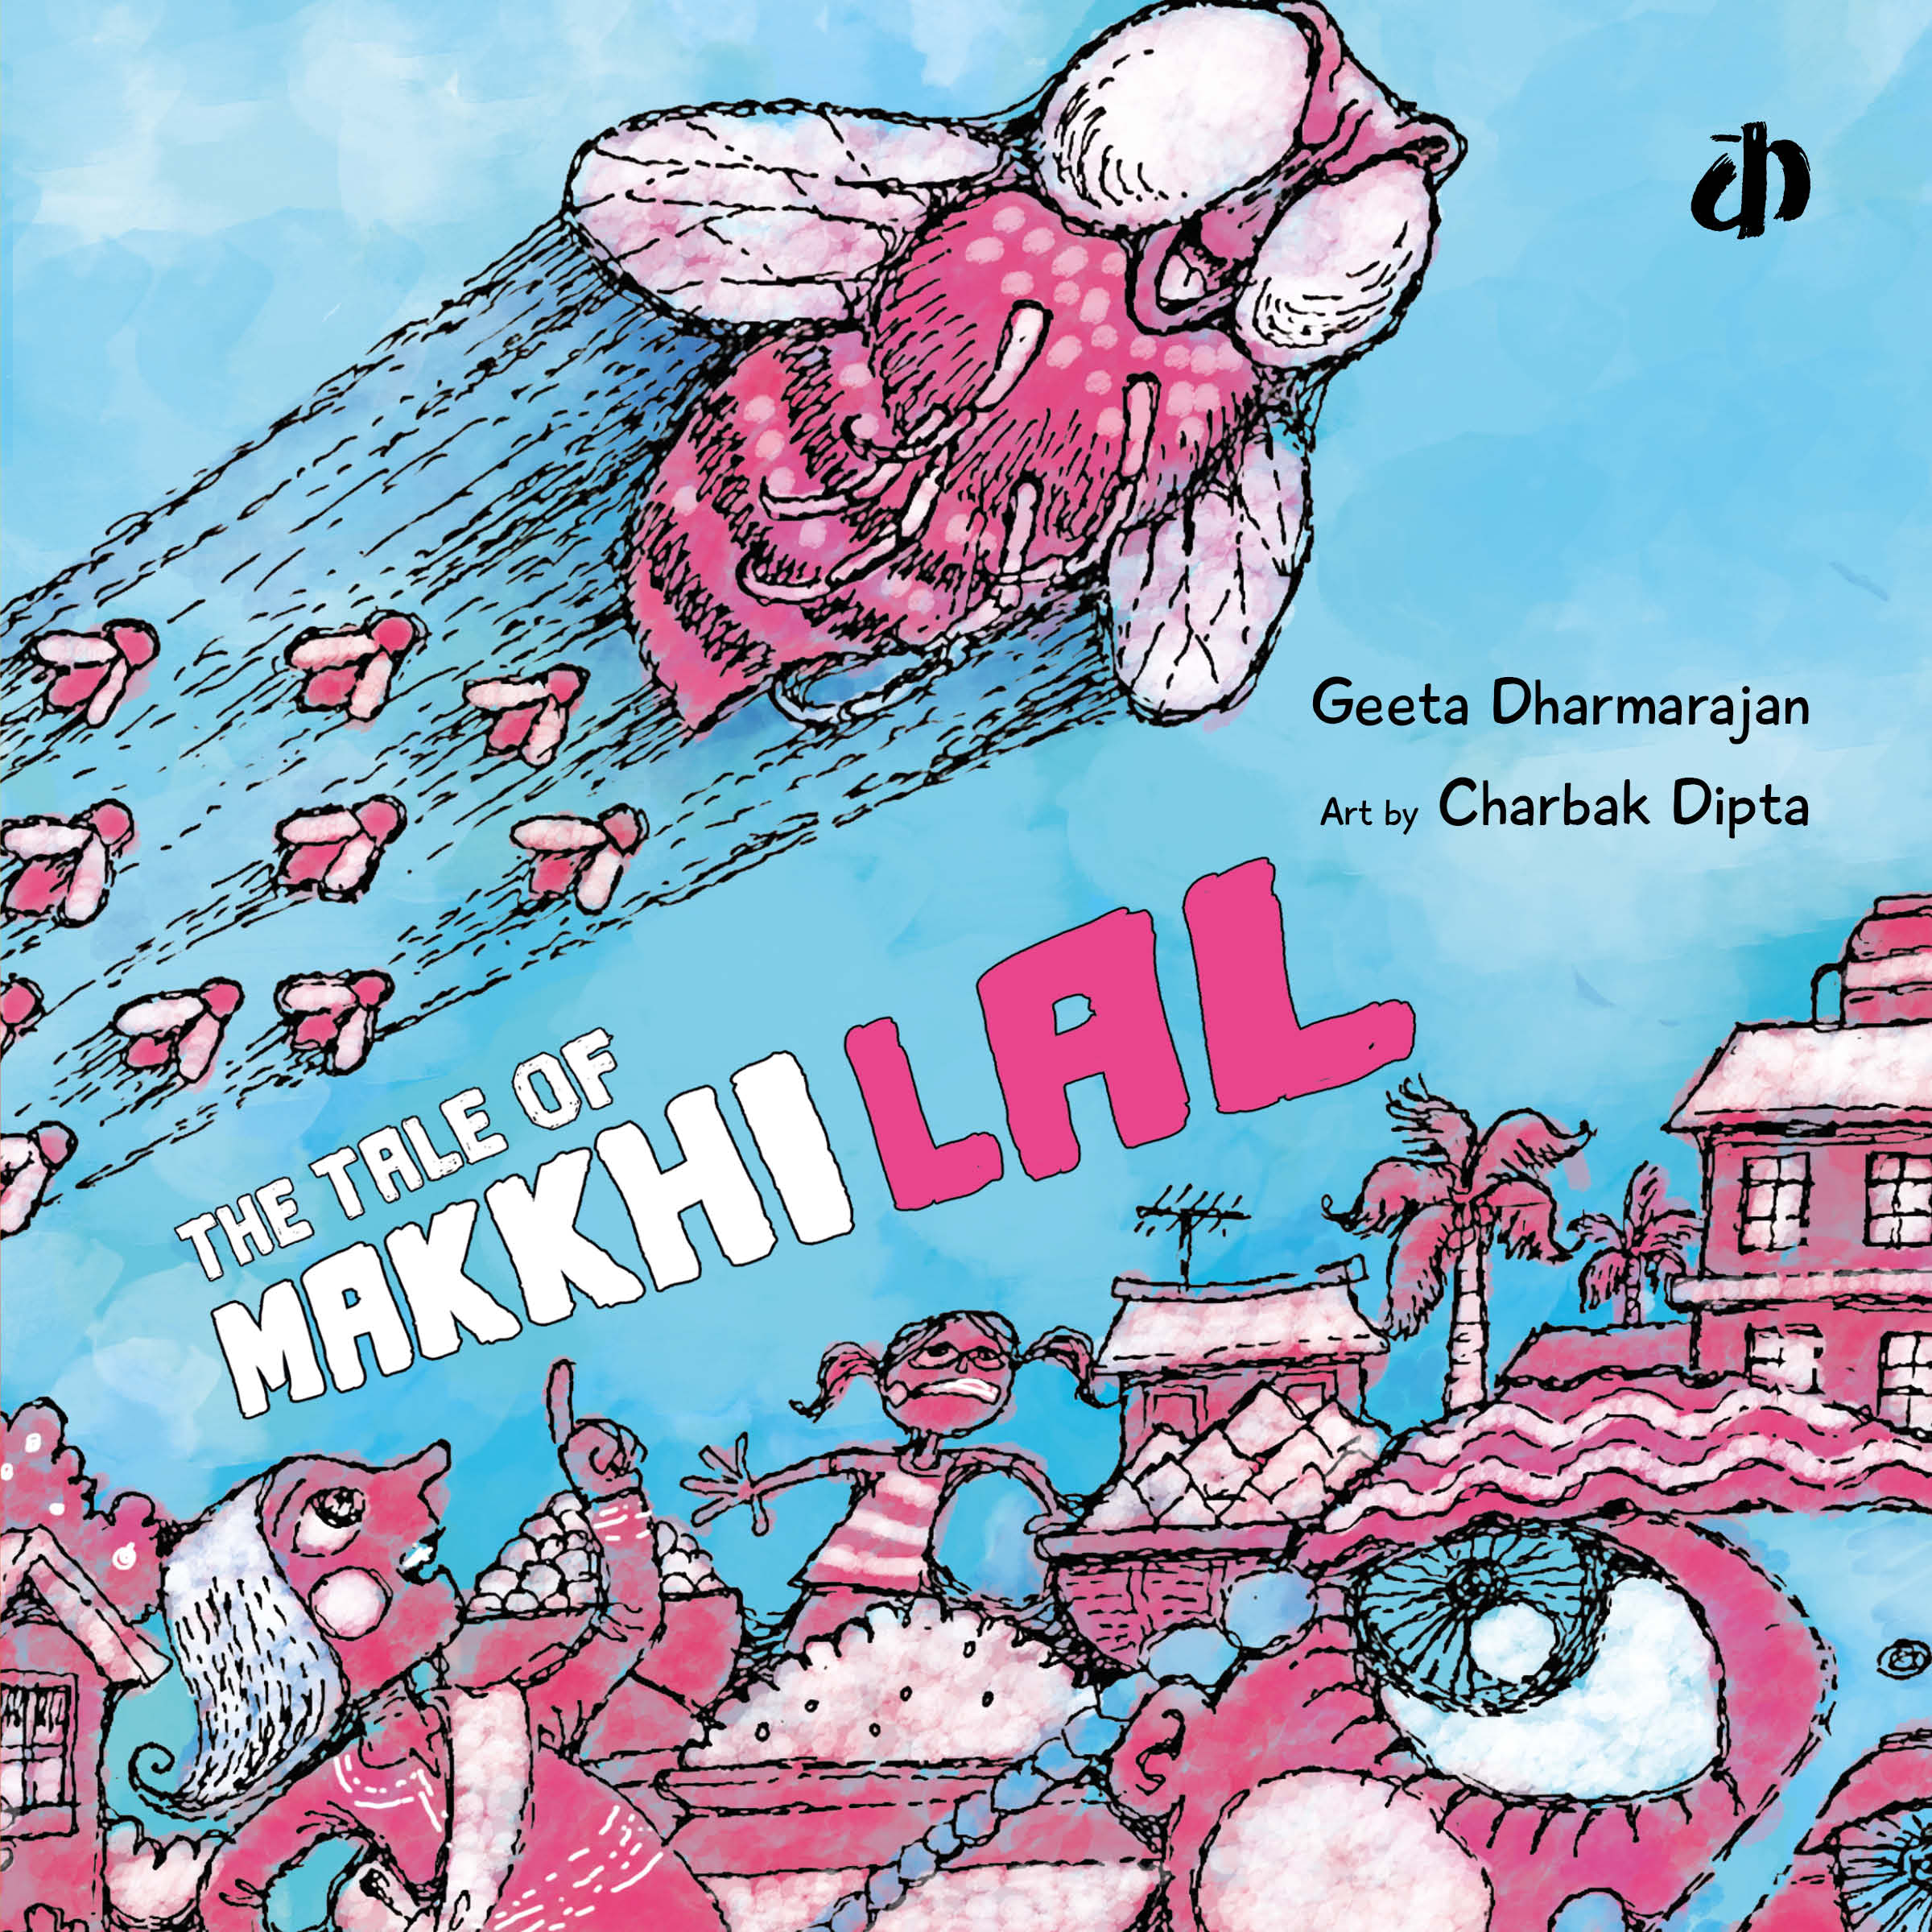 You are currently viewing The Tale of Makkhilal by Geeta Dharmarajan